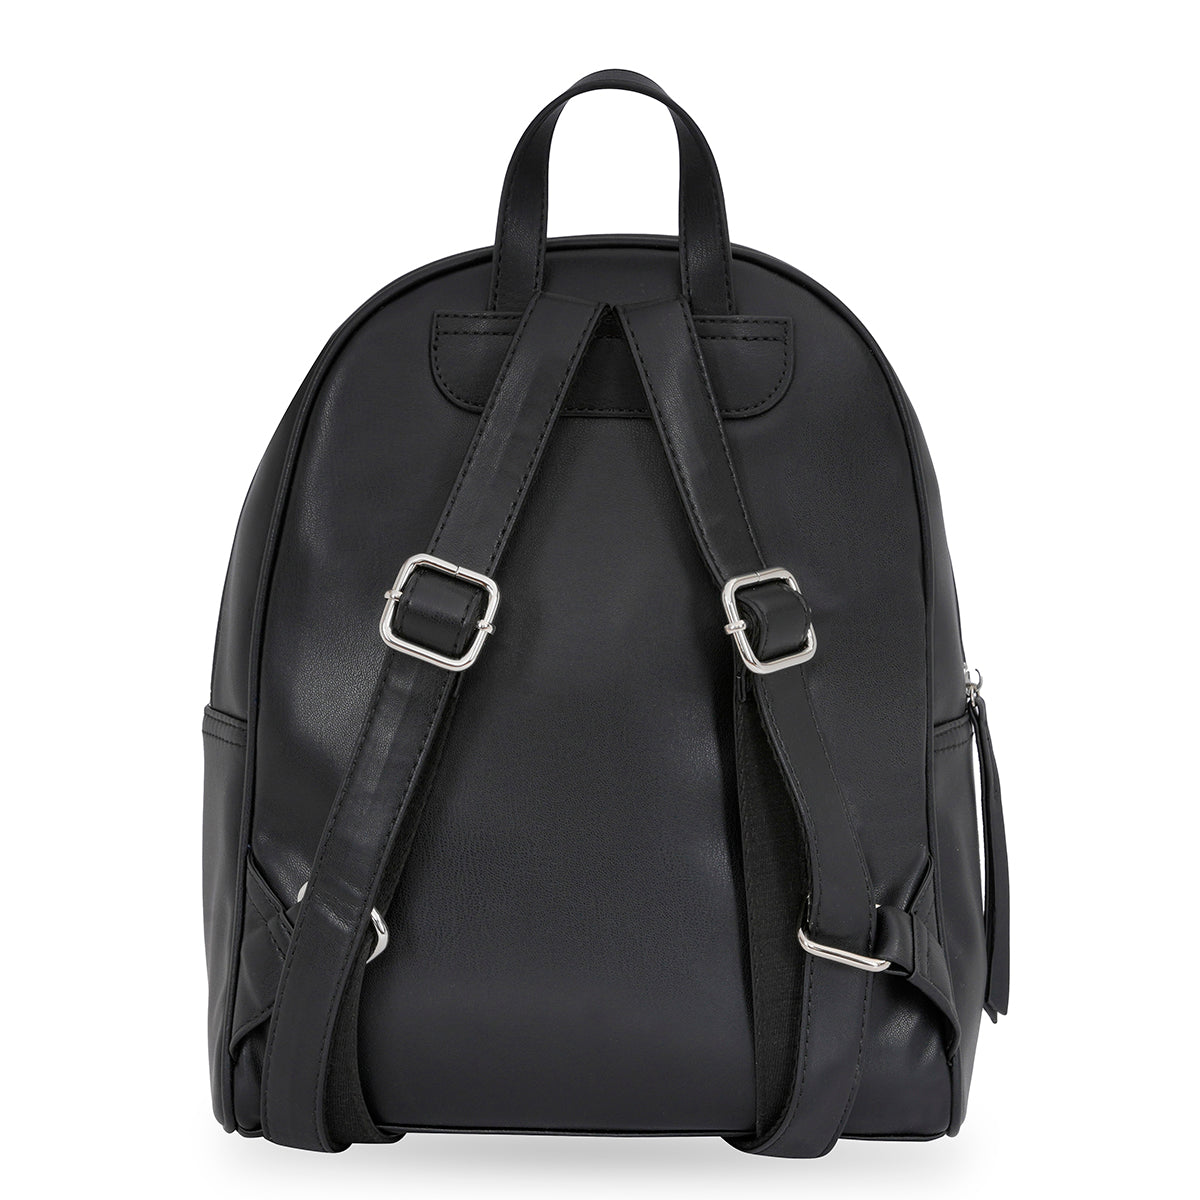 United Colors of Benetton Rylee Backpack Black